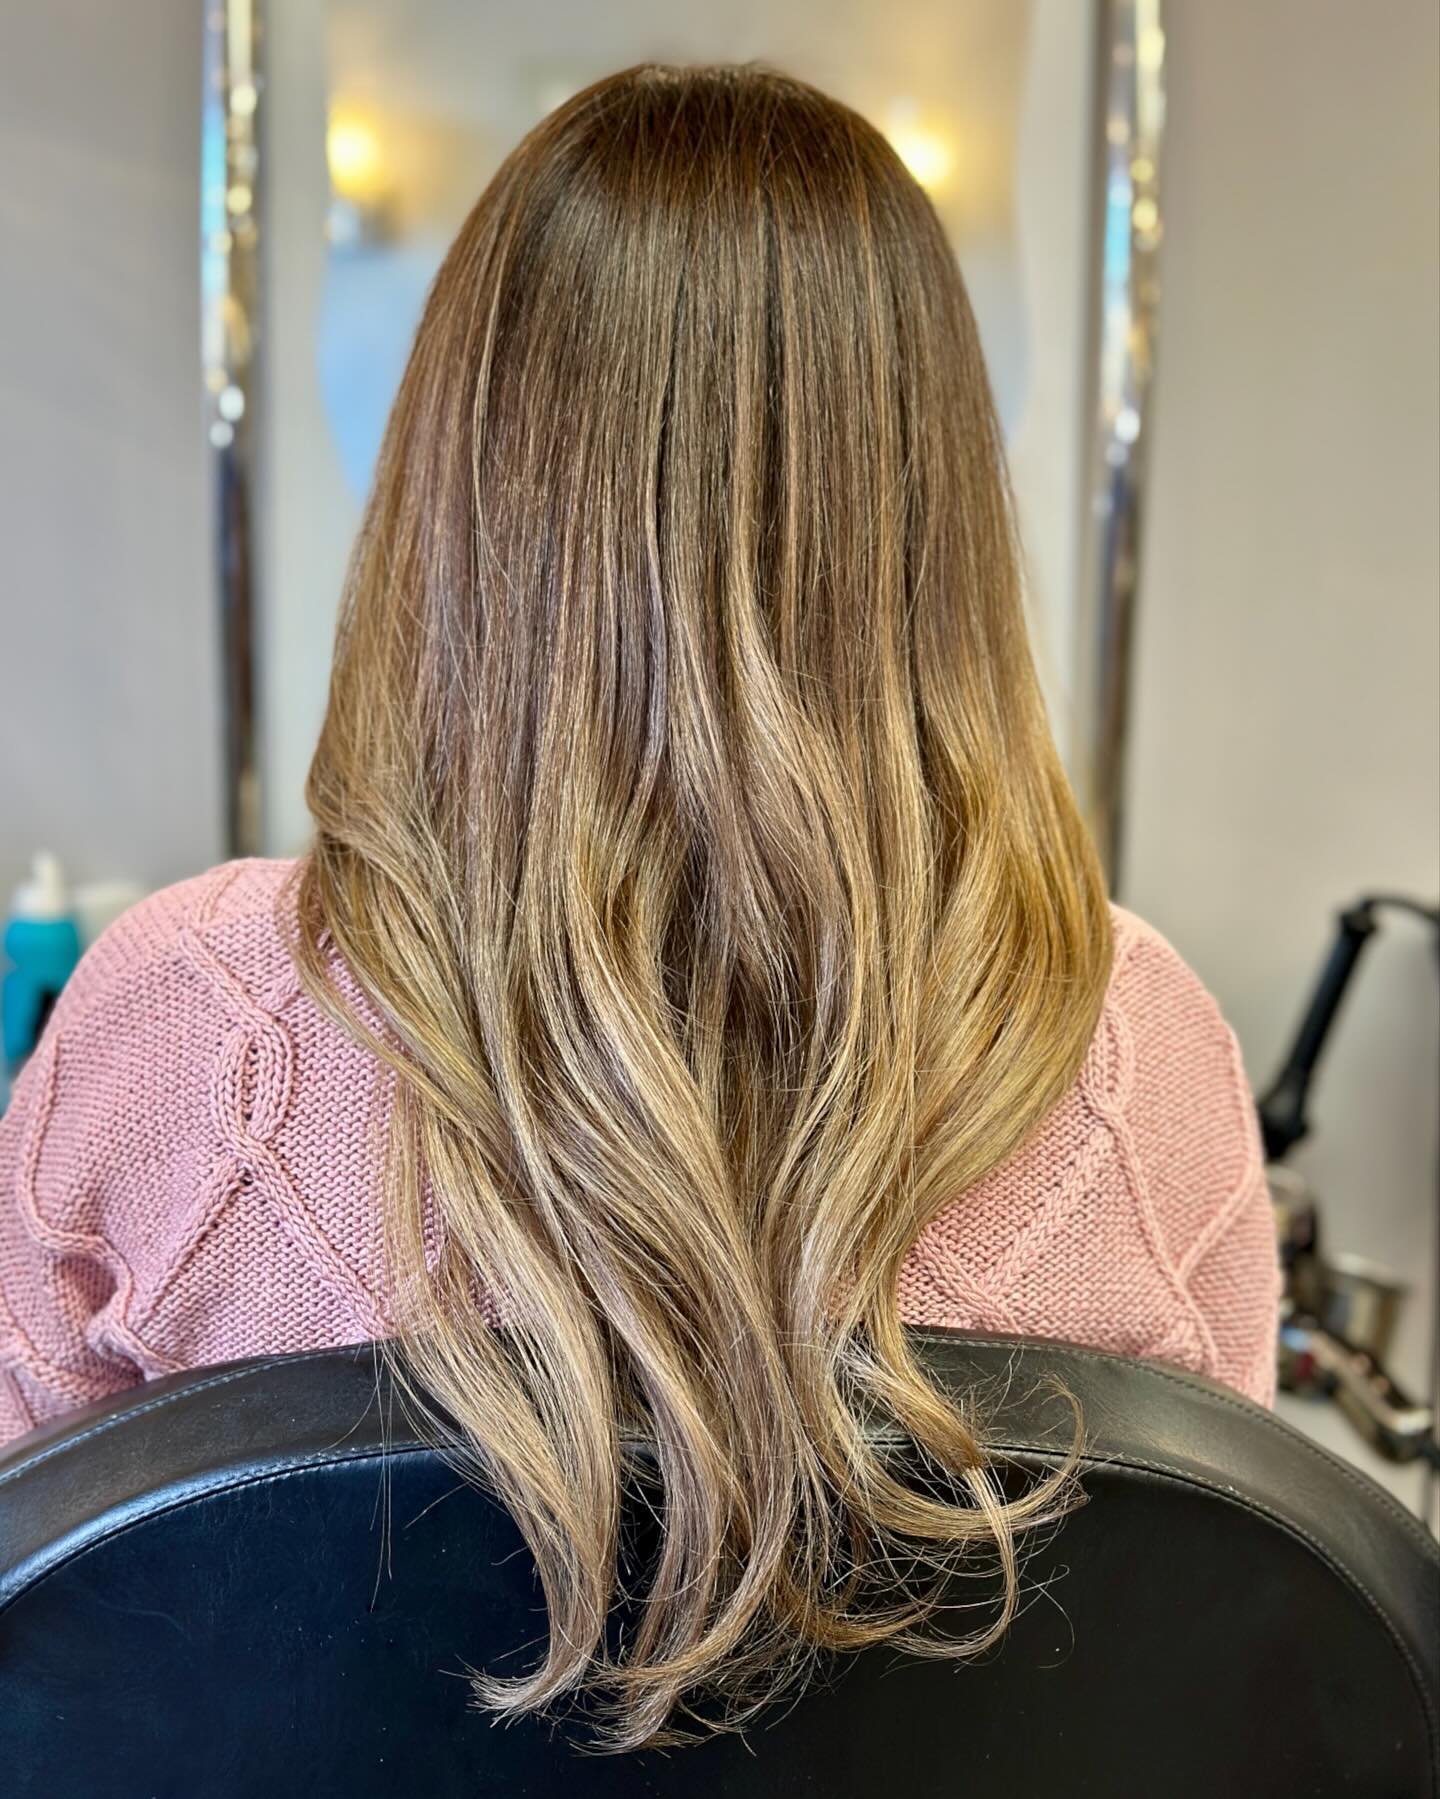 👉🏽 Swipe for a before 

Balayage and haircut to get ready for spring 🌼

#northernvirginiamagazine #northernvirginiahairstylist #northernvirginiahairsalon #northernvirginiahair